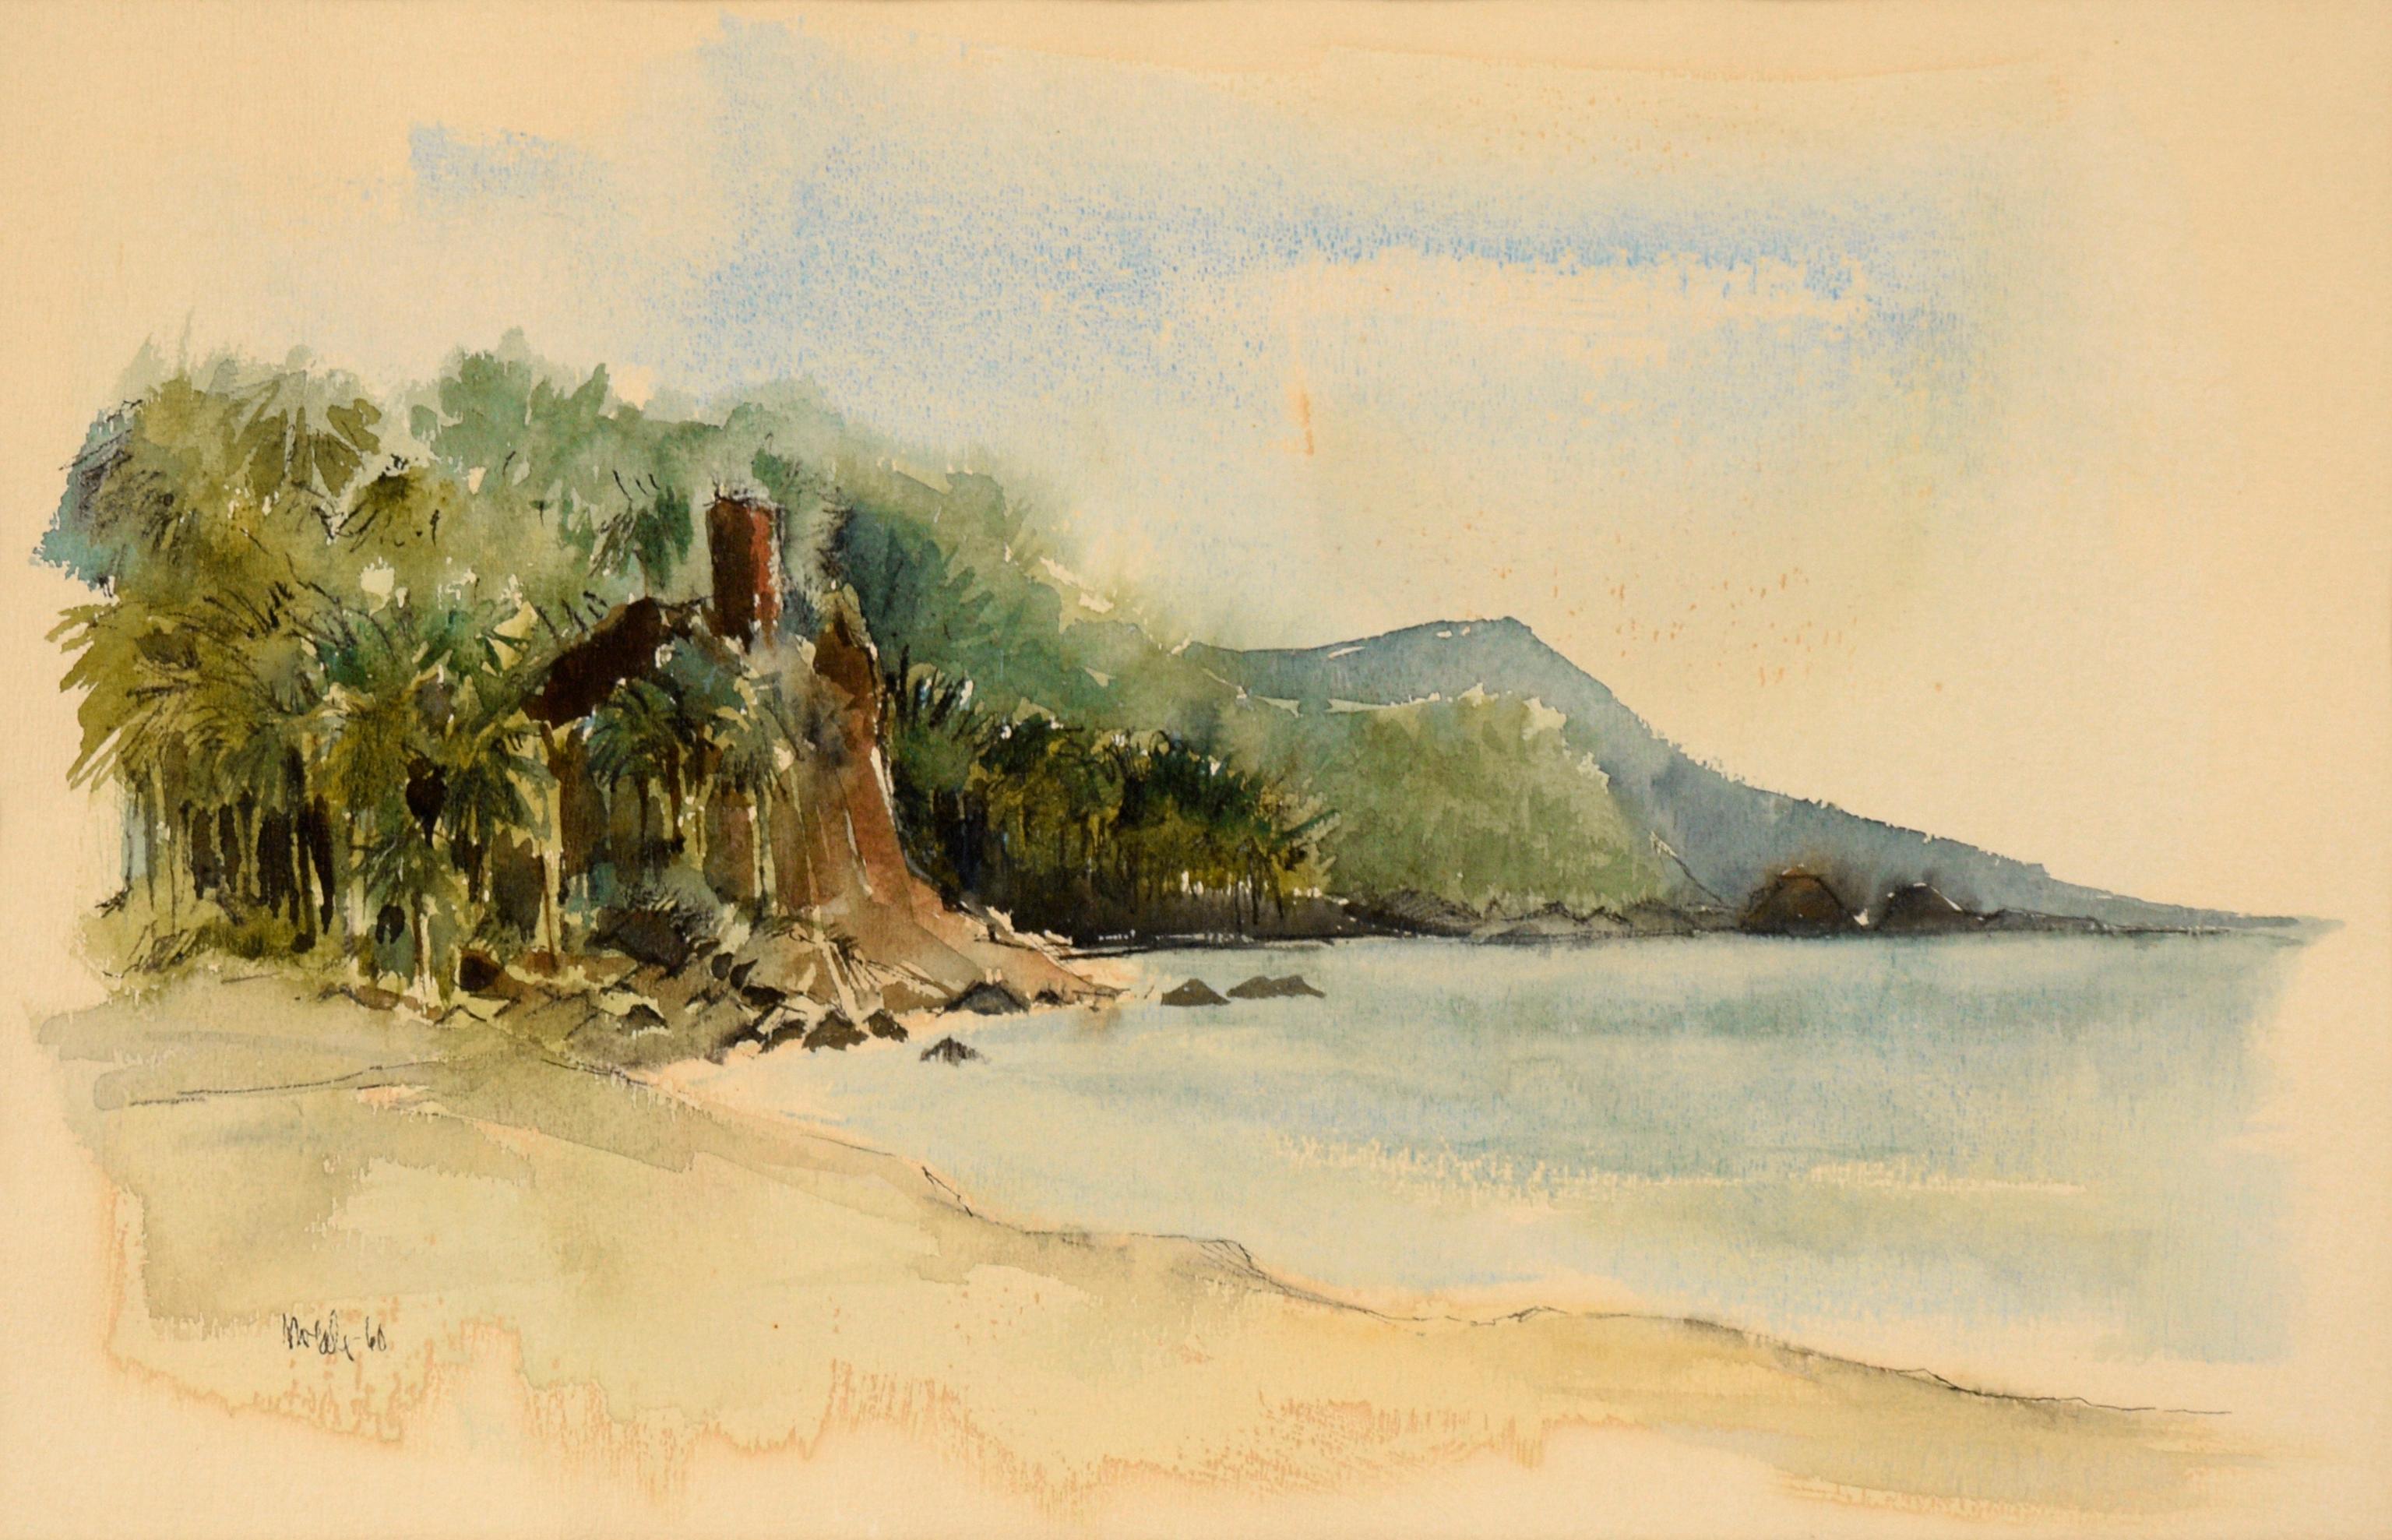 Hawaiian Tropical Beach and Mountains - Watercolor on Paper 1960 - Art by Unknown